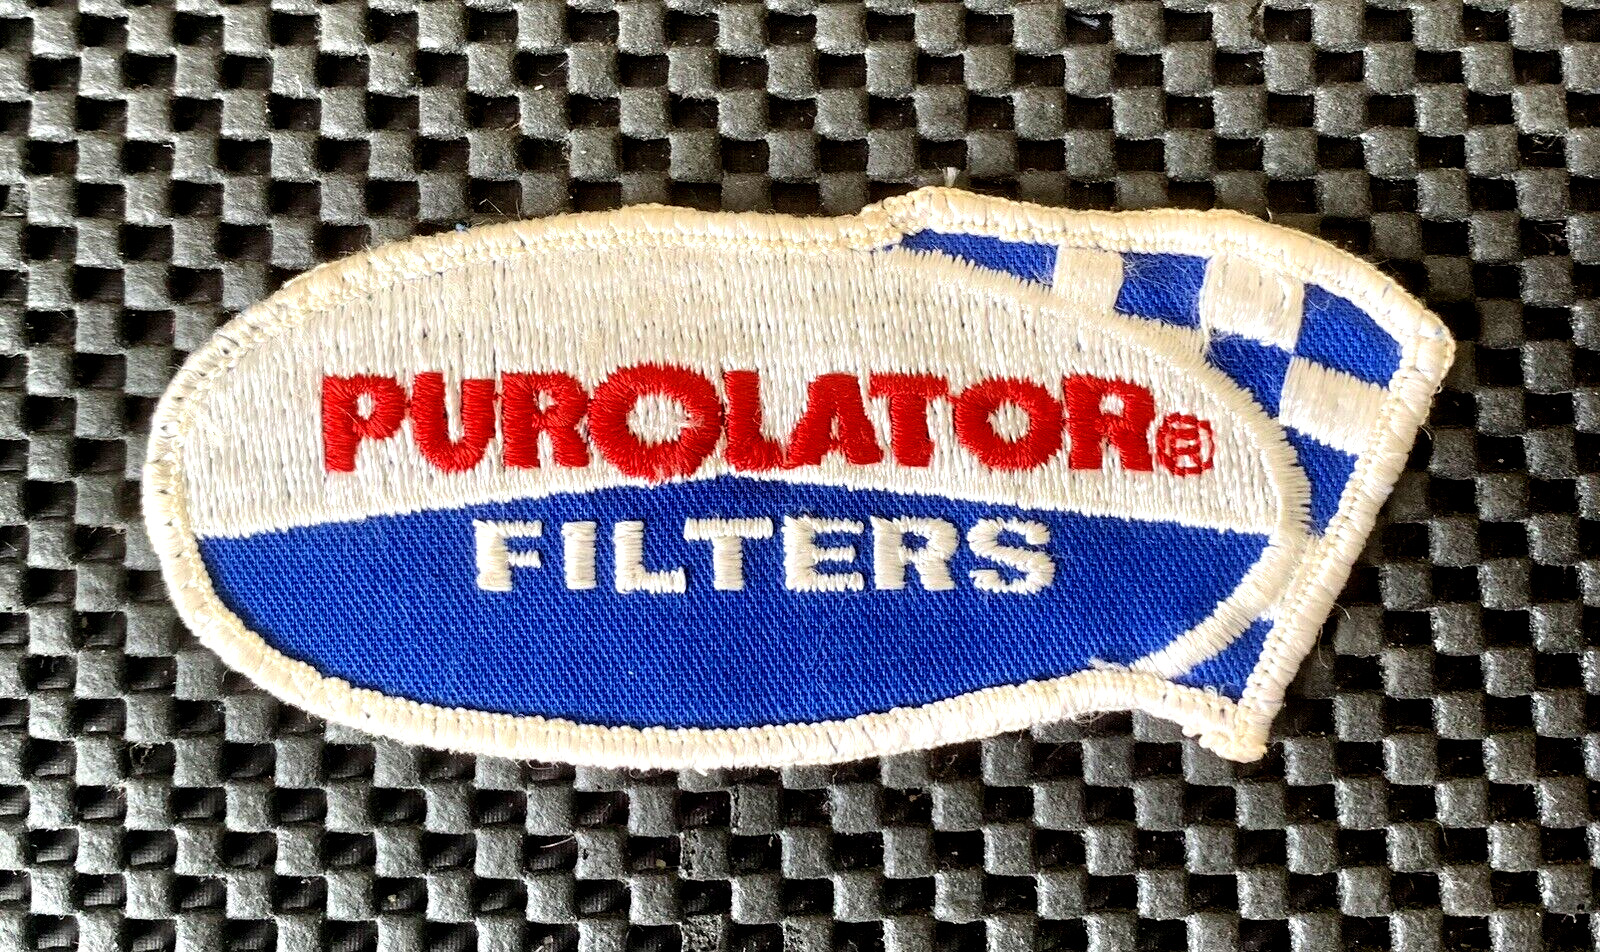 PUROLATOR FILTERS SEW ON ONLY PATCH NASCAR AUTOMOTIVE RACING FLAG 4 1/2\